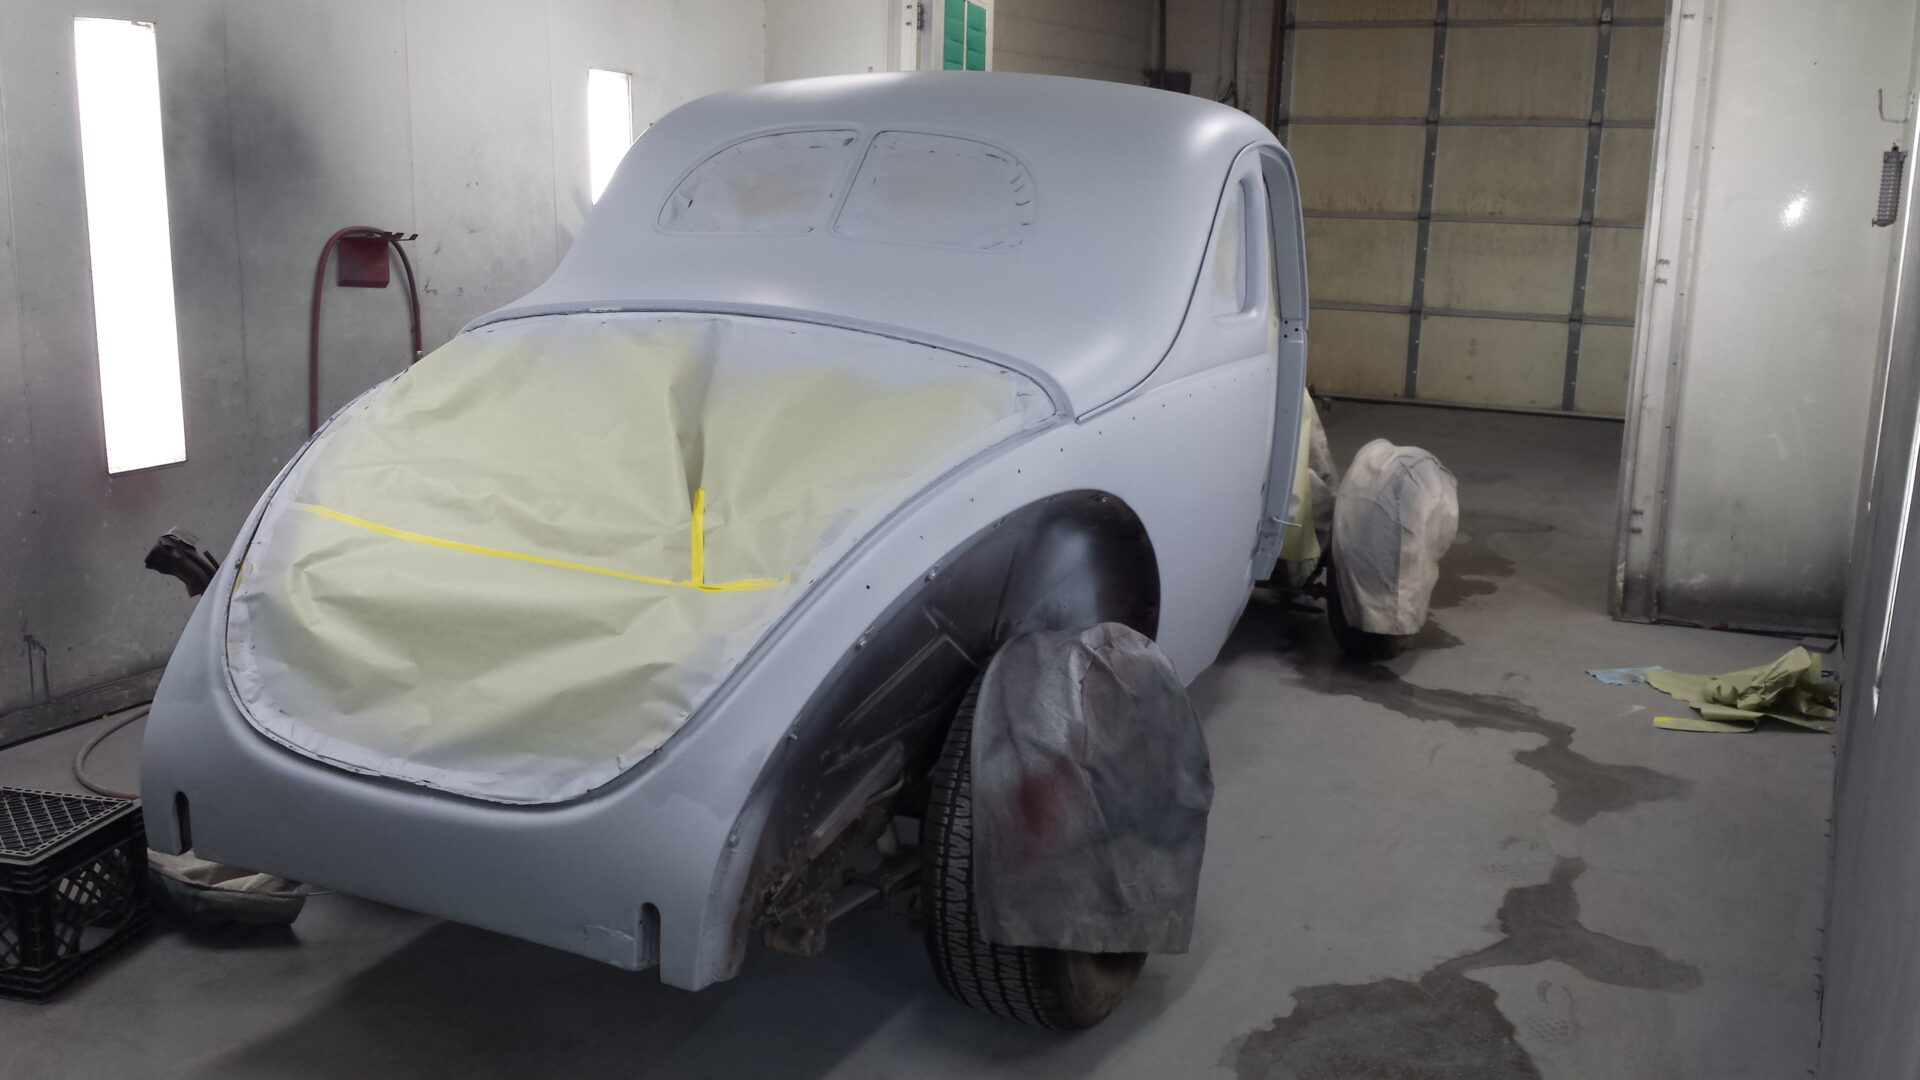 An ongoing paint job for the 1940 Ford model